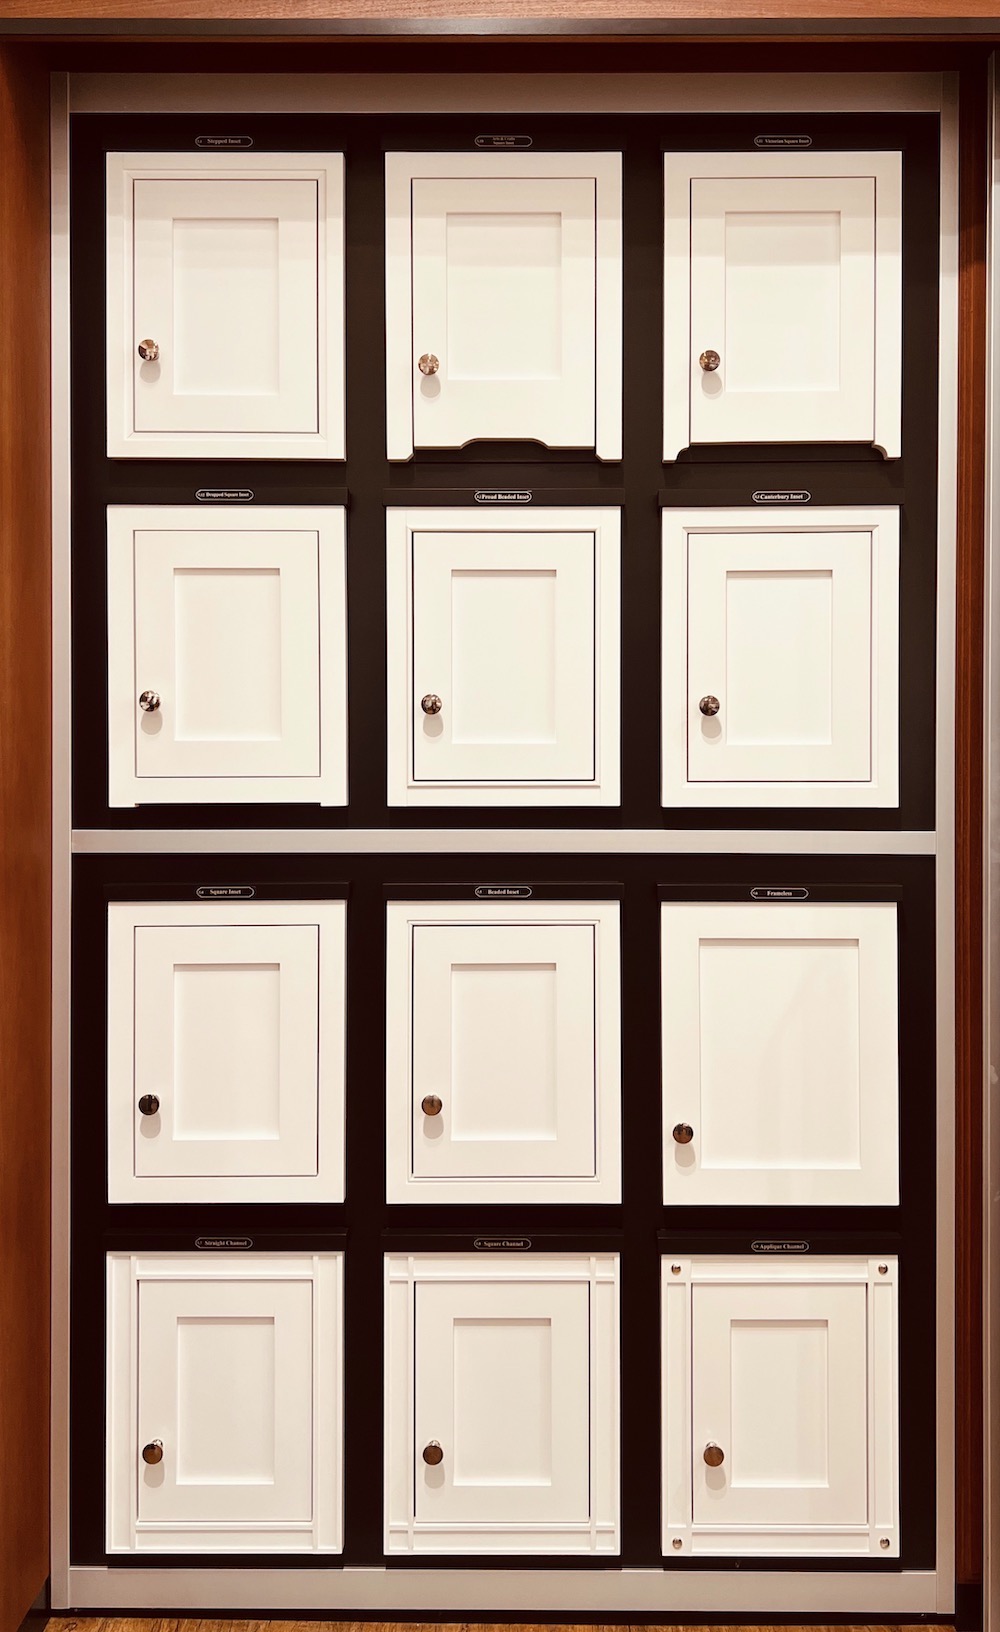 Crown Point Cabinetry inset face frames